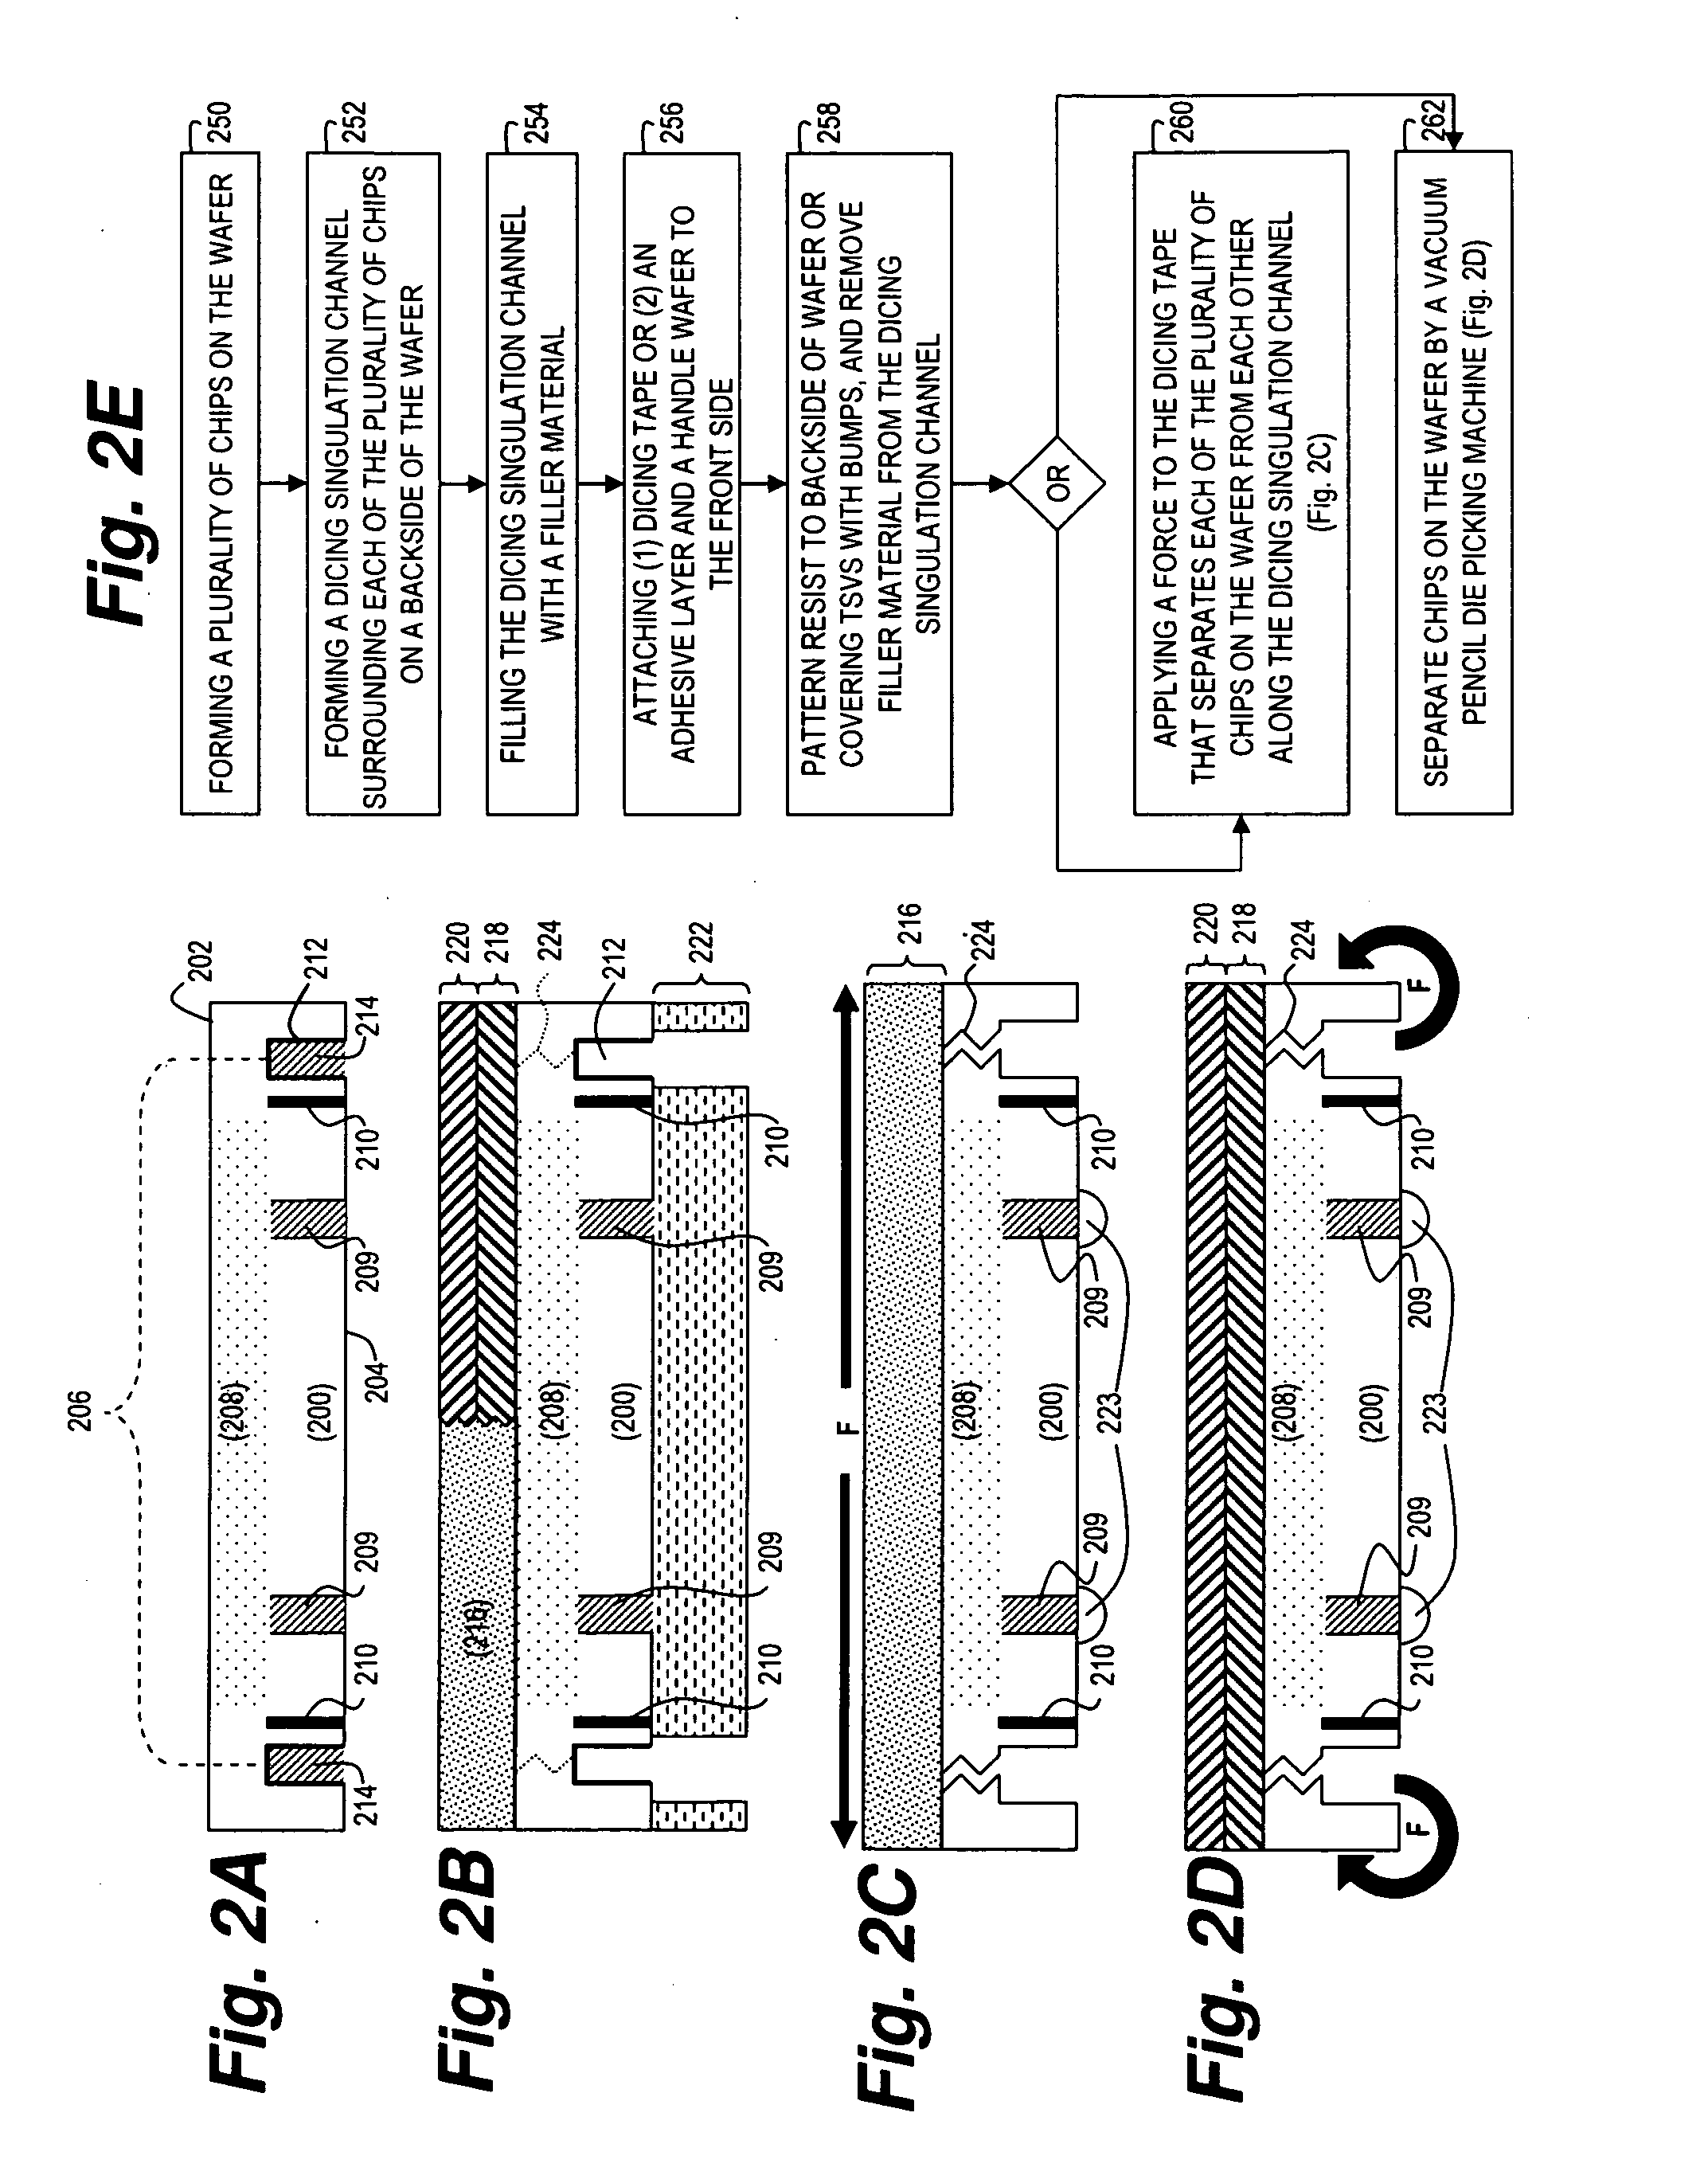 Process for wet singulation using a dicing moat structure